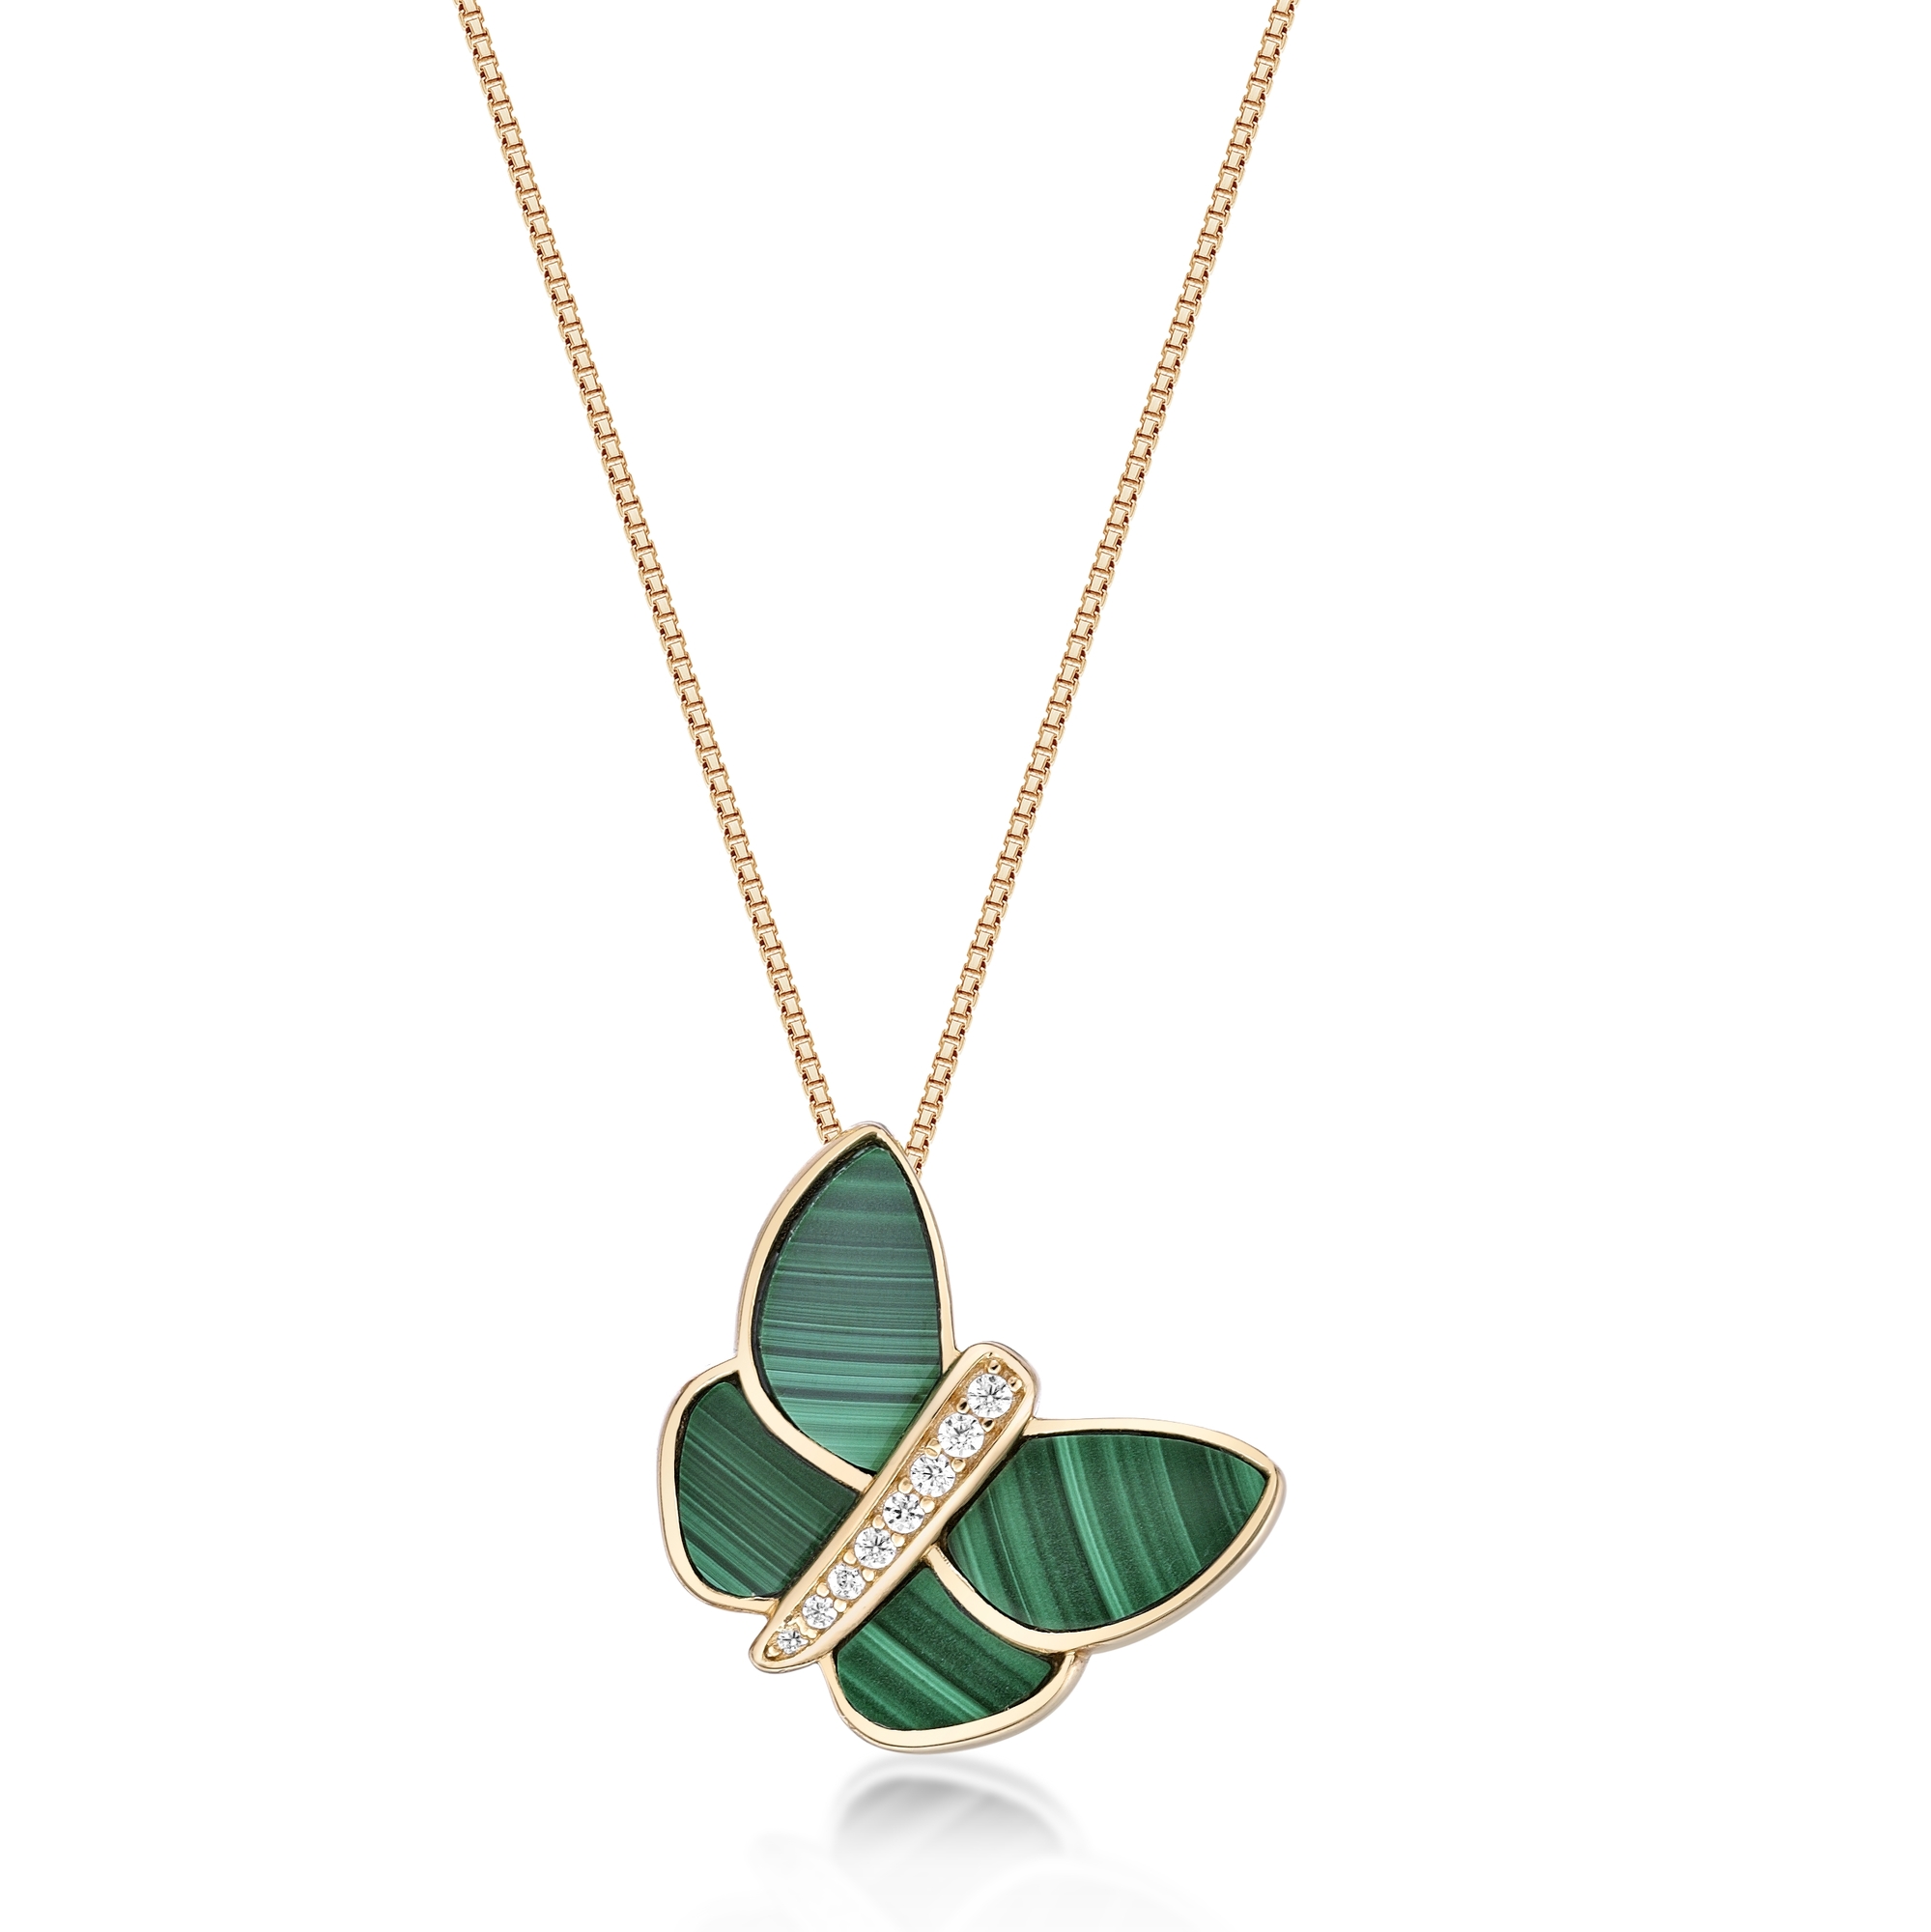 Lavari Jewelers Women’s Malachite Butterfly Pendant Necklace with Spring Ring Clasp, 925 Sterling Silver, Cubic Zirconia, 18 Inch Chain